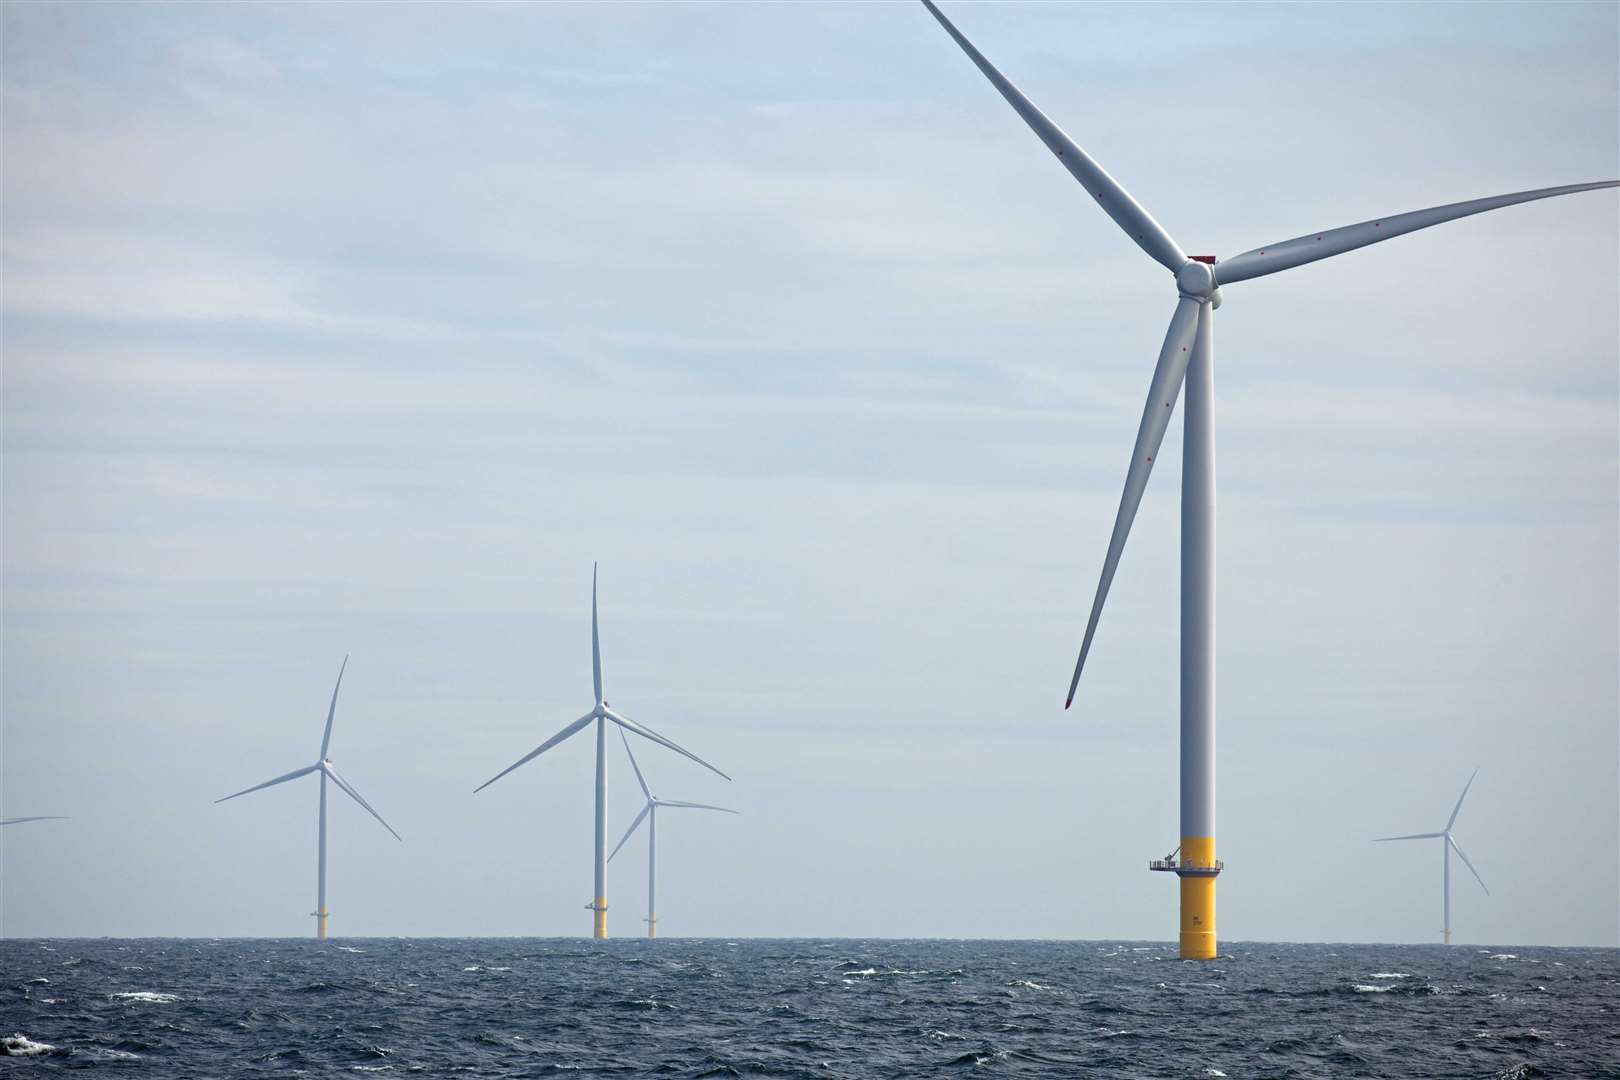 The new report contains five recommendations to help Scotland reap the benefits of offshore wind investment.